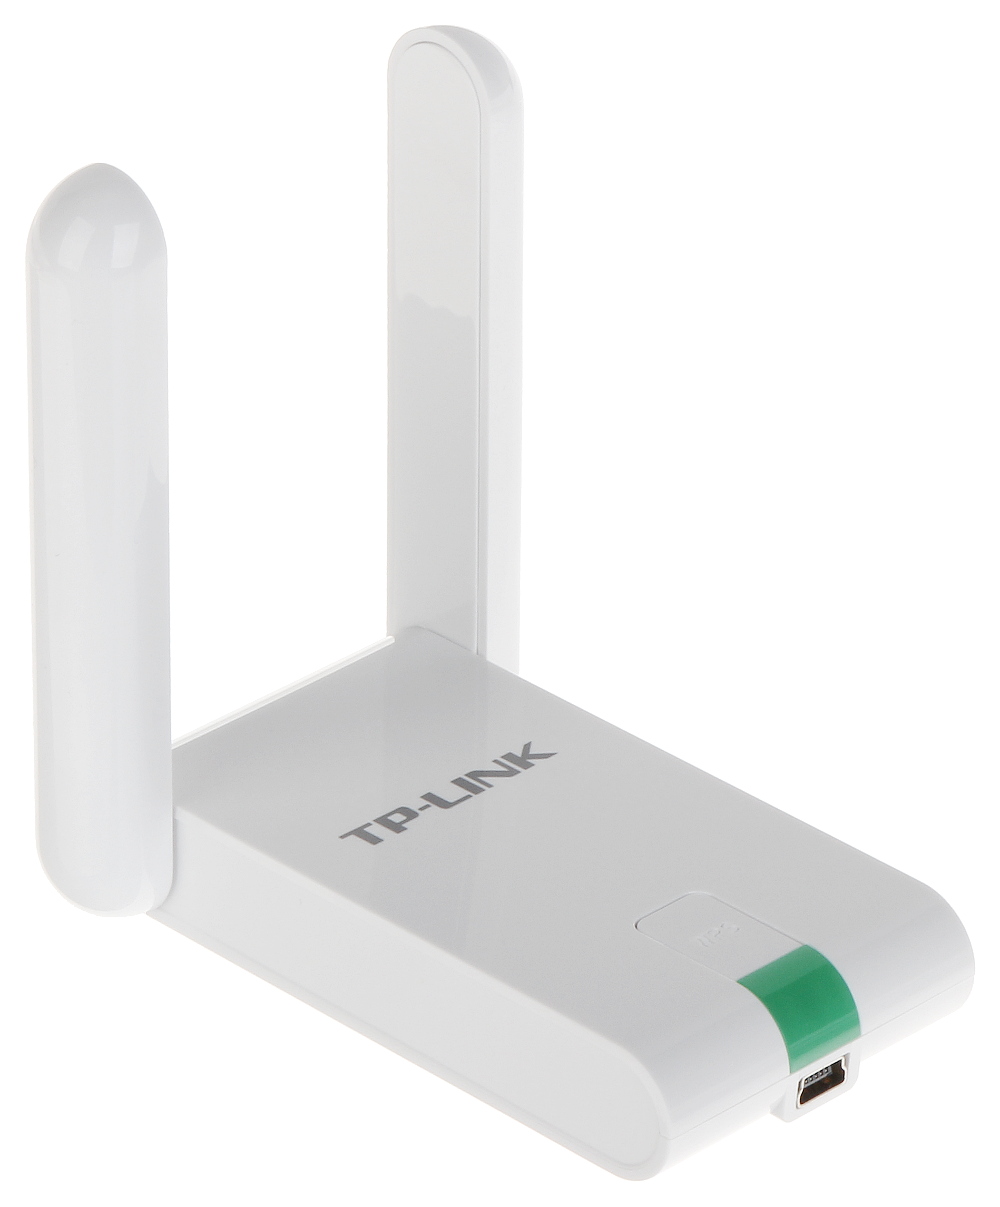 WLAN USB ADAPTER TL-WN822N 300 Mbps TP-LINK - 2.4 GHz and 5 GHz Wireless  Card Adapters - Delta